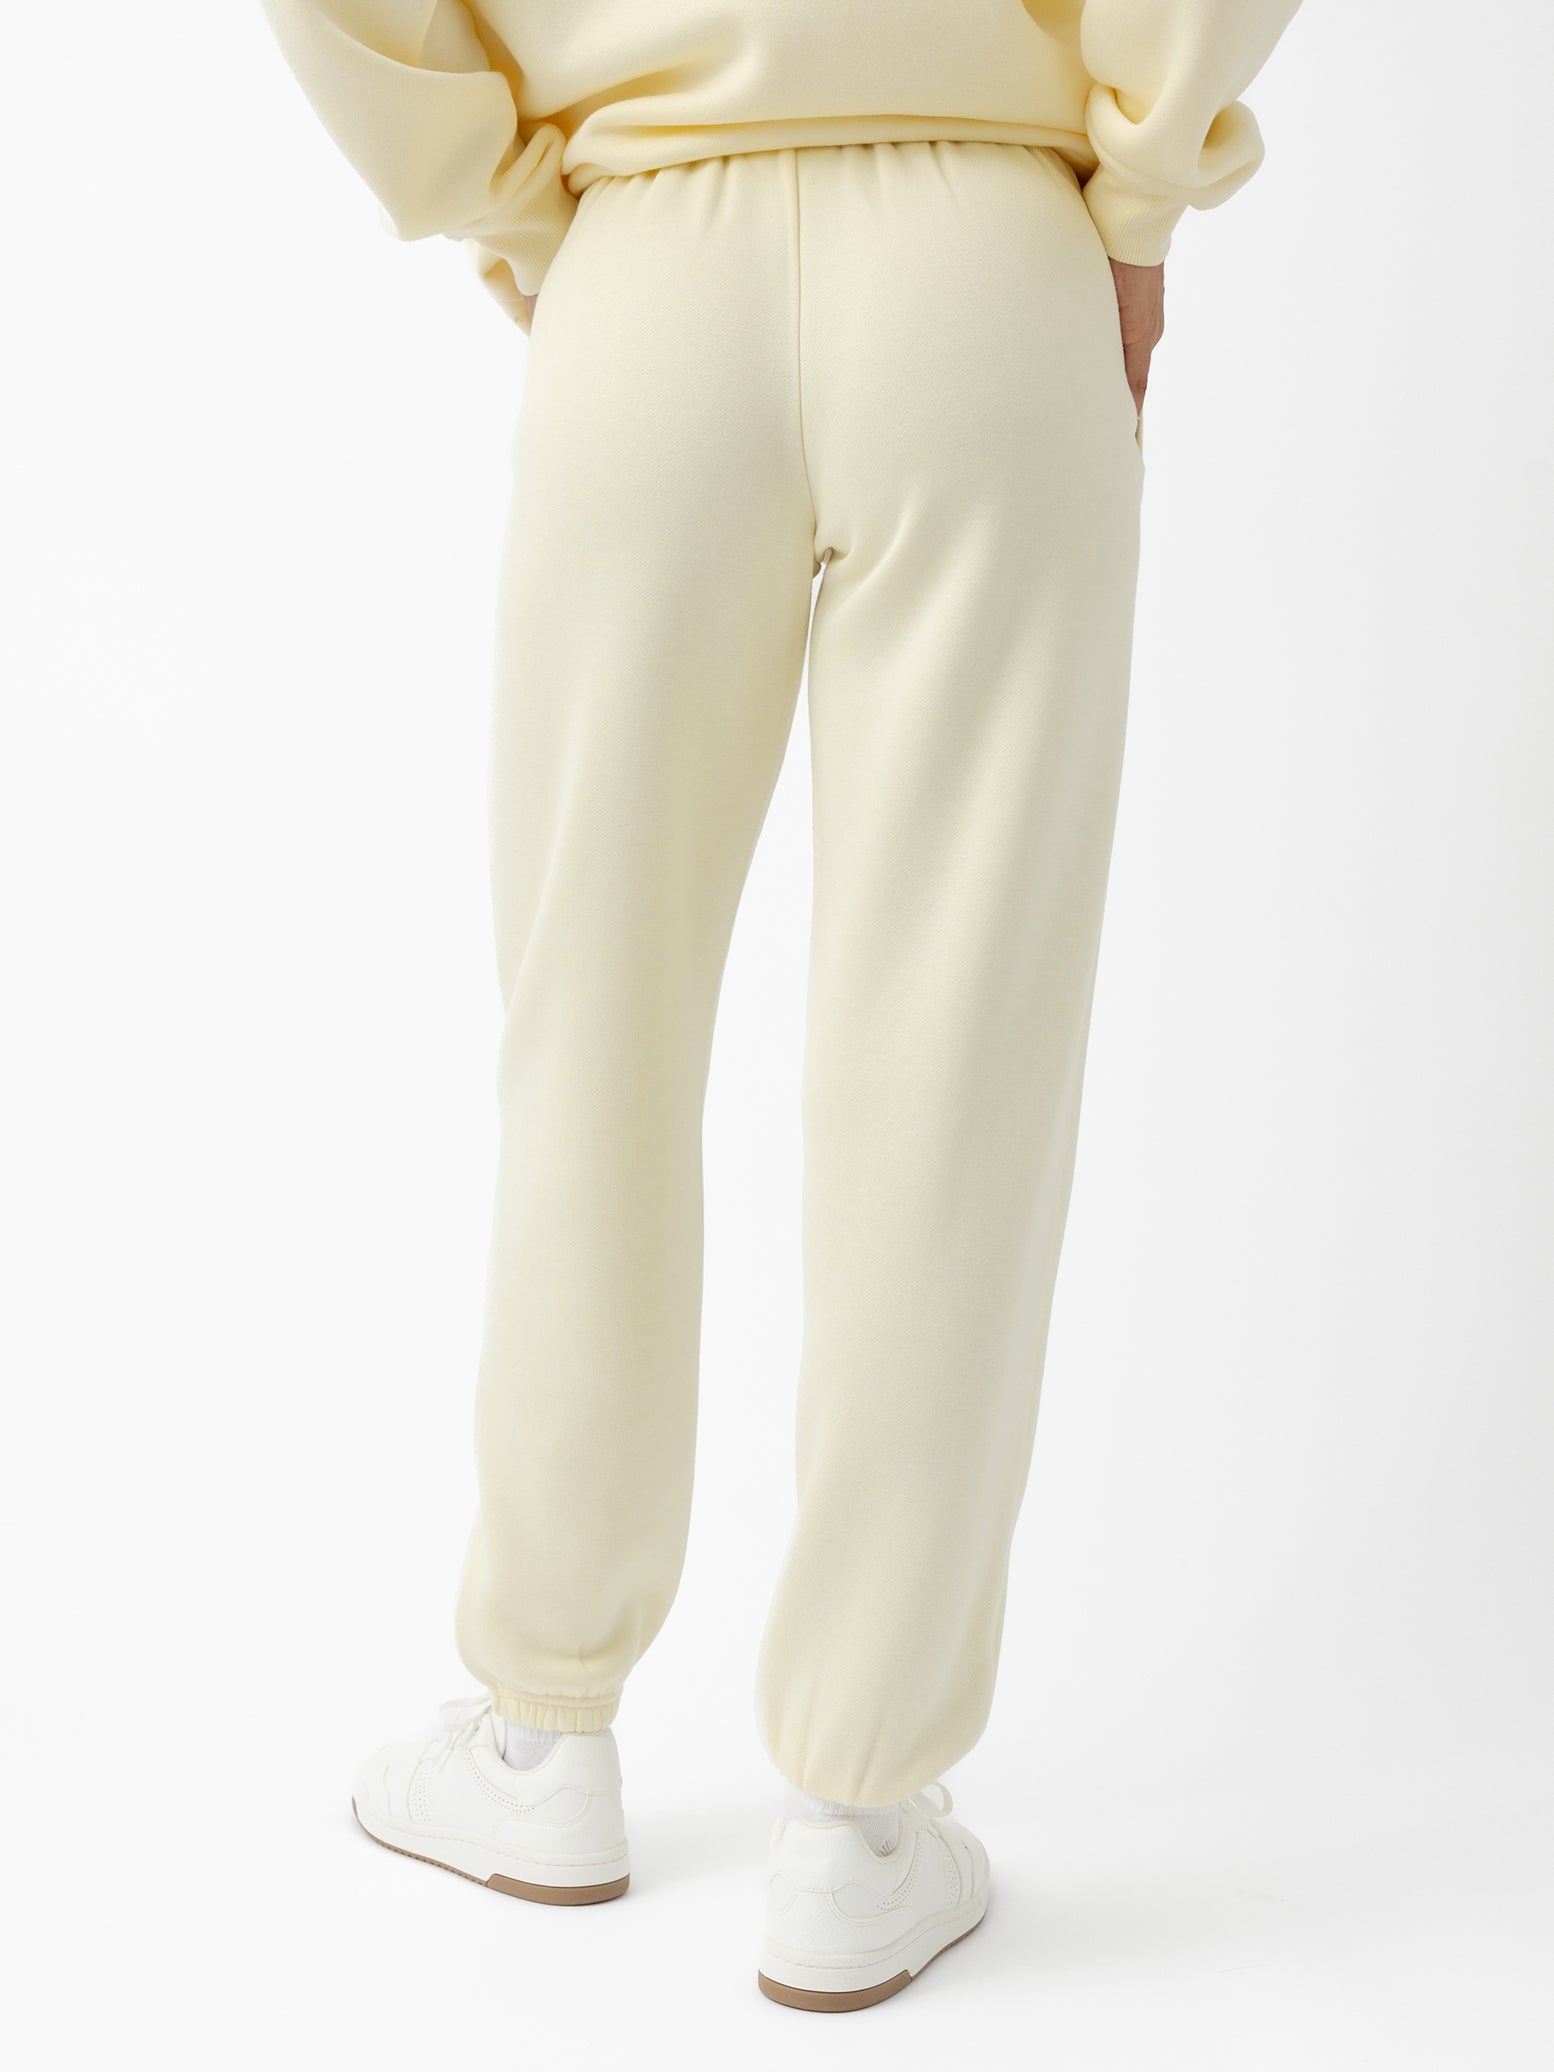 Lemonade CityScape Joggers. The Joggers are being worn by a female model. The photo is taken from the waist down with the models hand by the pocket of the joggers. The back ground is white. 